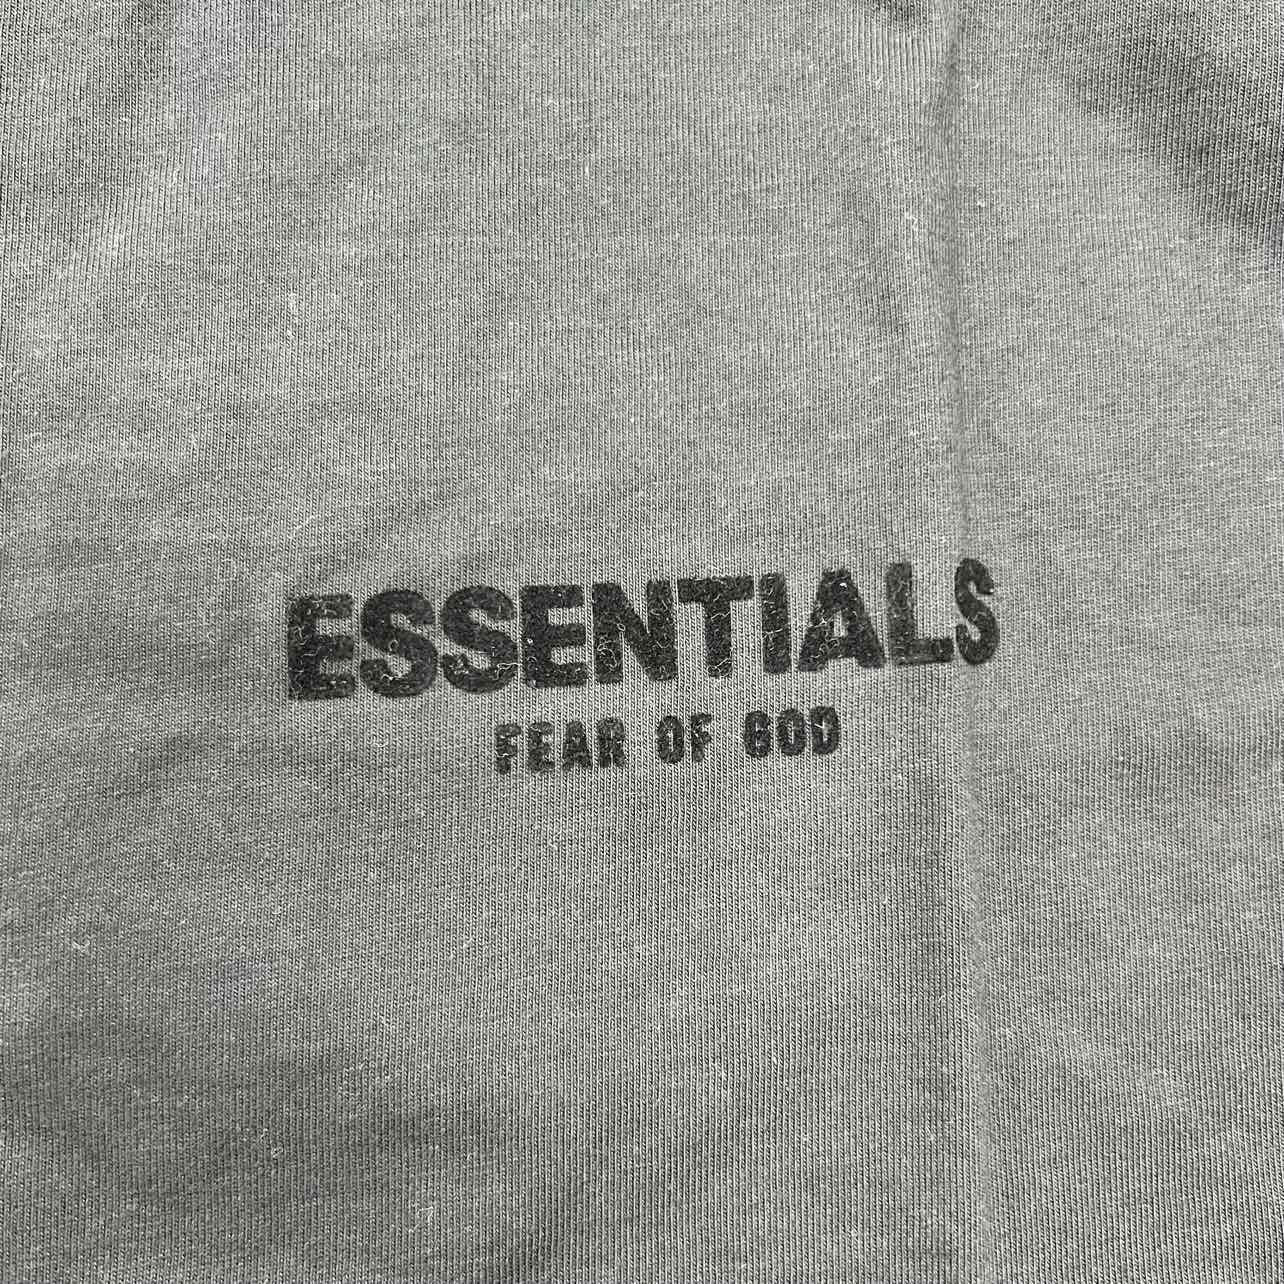 Fear of God T-Shirt &quot;ESSENTIALS&quot; Stretch Limo New Size 2XL